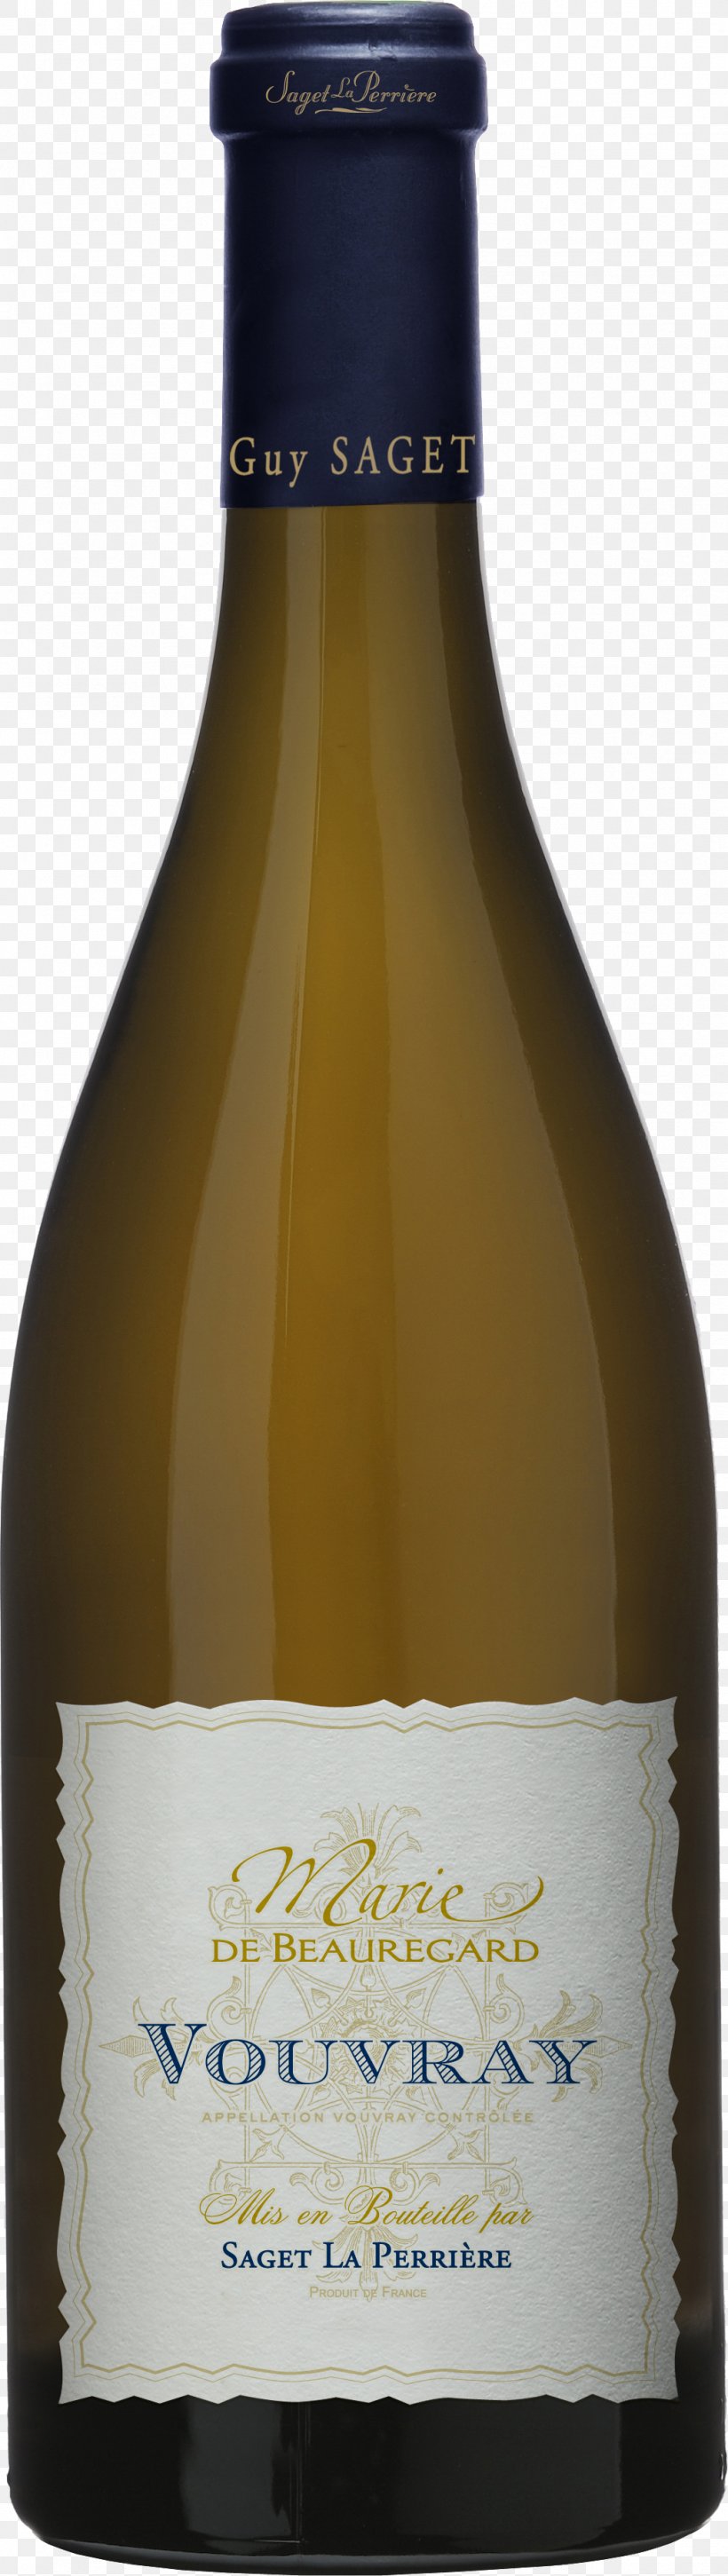 Champagne Vouvray AOC Wine Chinon AOC, PNG, 1039x3678px, Champagne, Alcoholic Beverage, Beer Bottle, Bottle, Dessert Wine Download Free